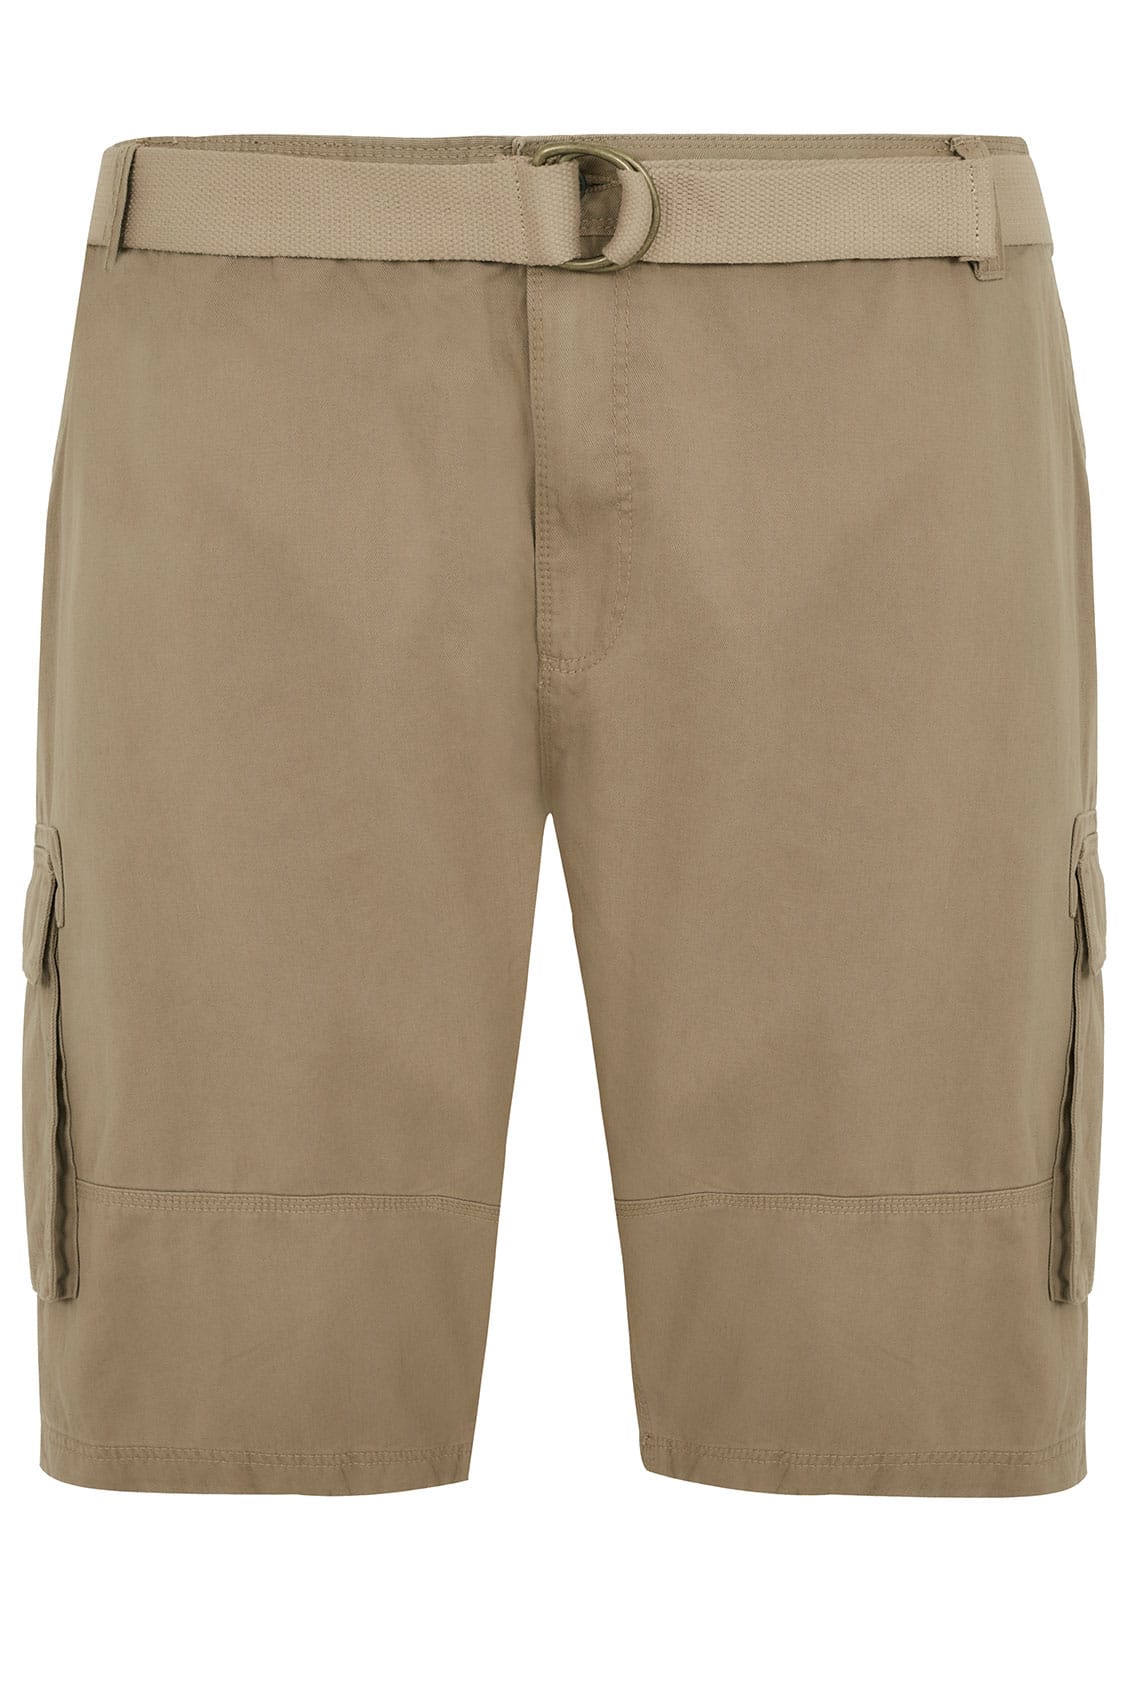 BadRhino Stone Brown Cargo Shorts With Canvas Belt 1